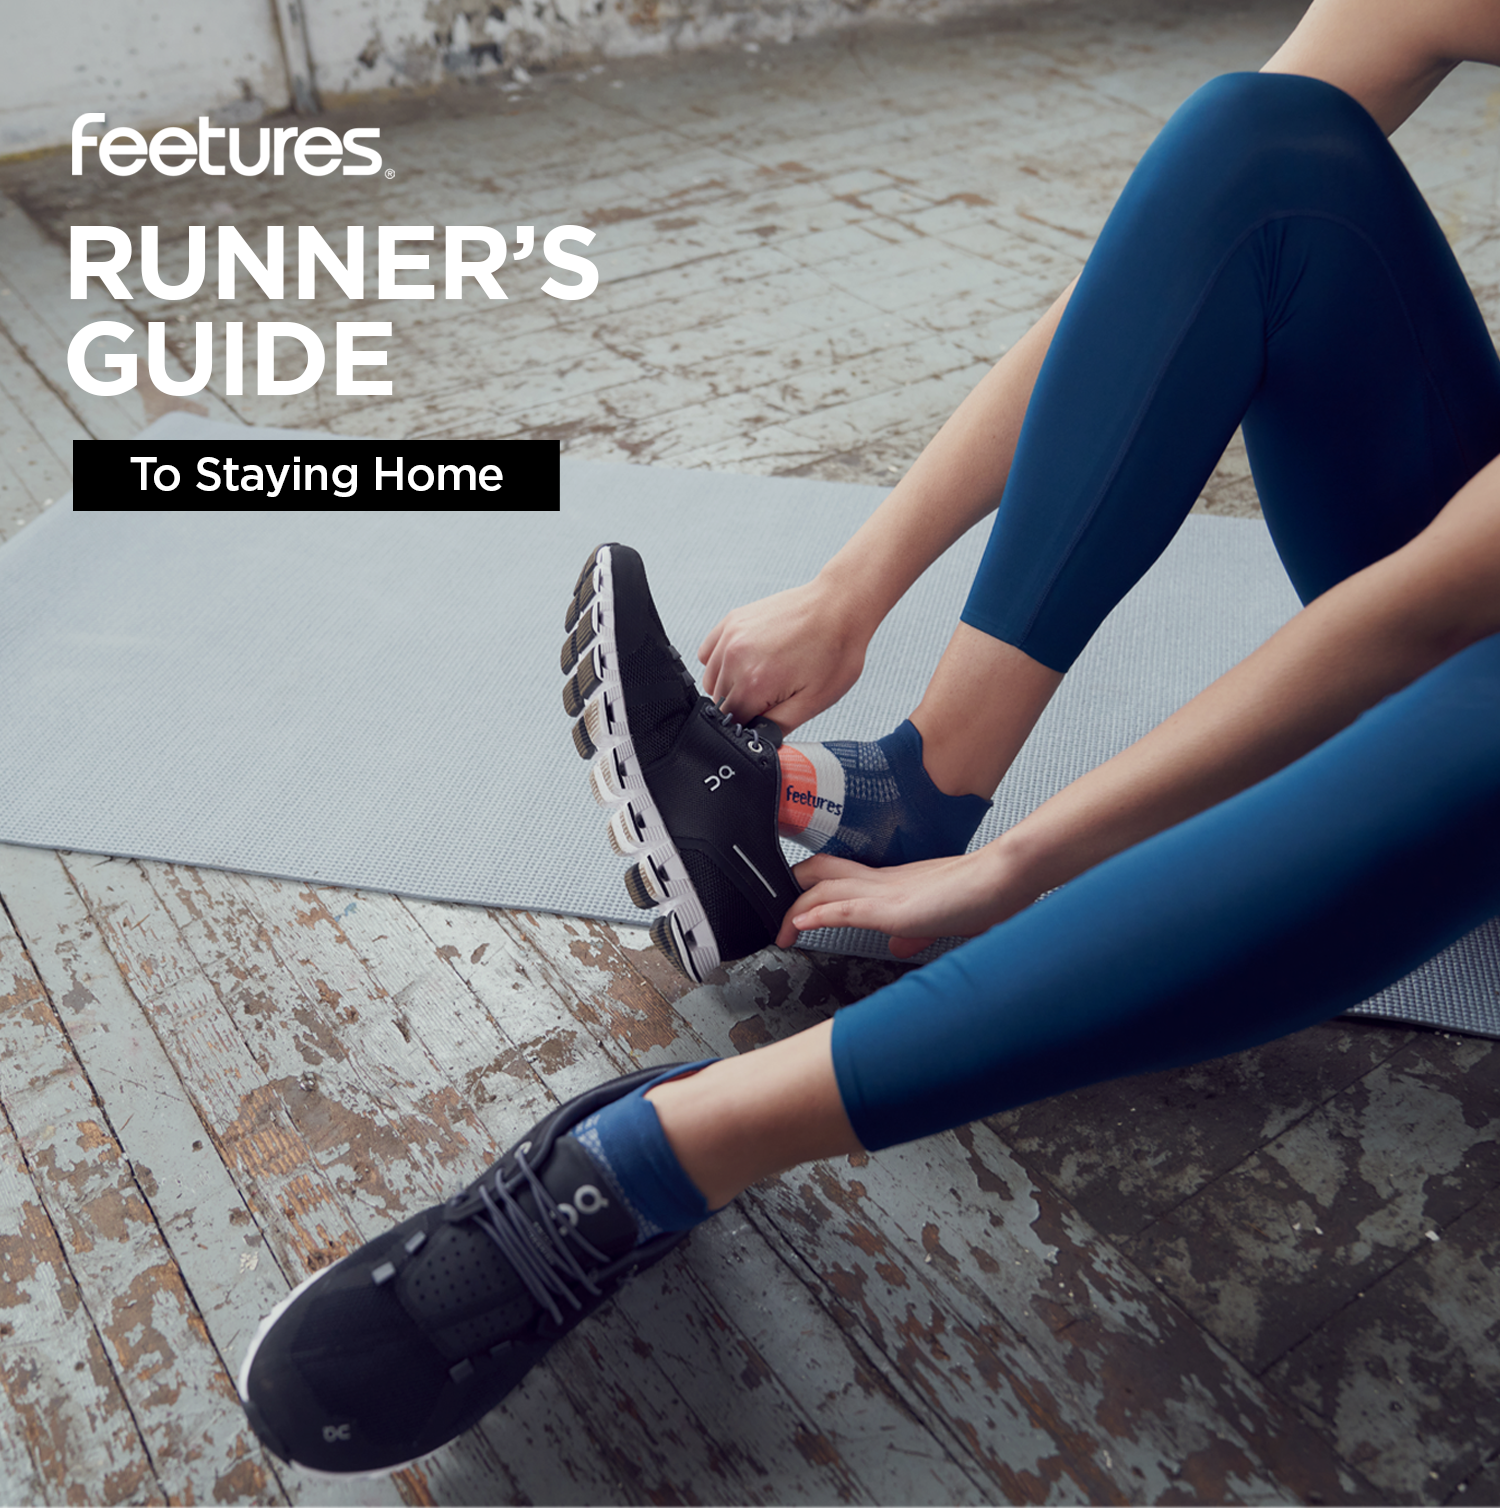 Runner’s Guide to Staying Home